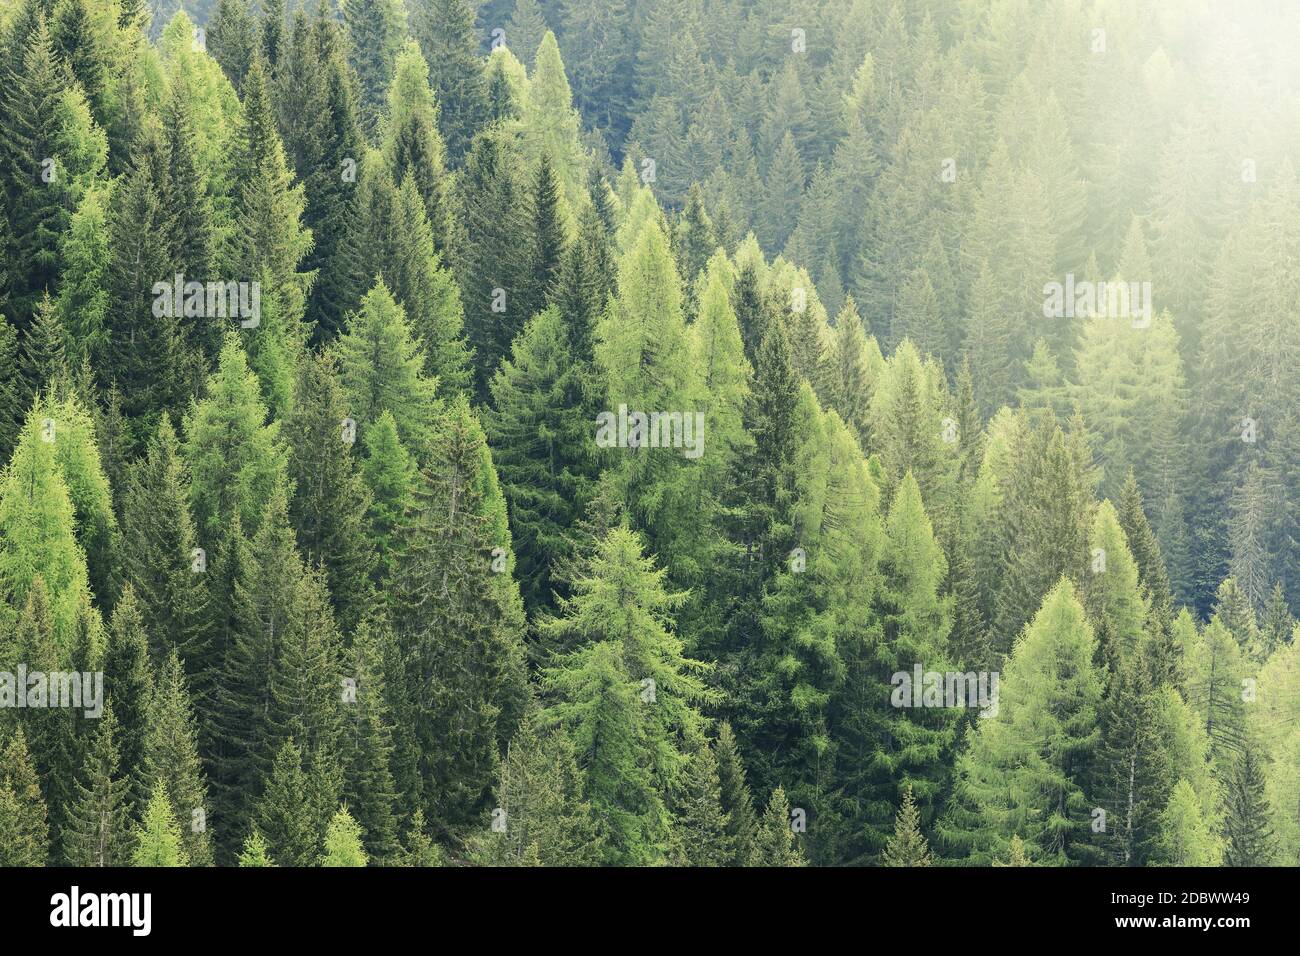 Magic forest lit by the sunlight. Coniferous forest region. Stock Photo